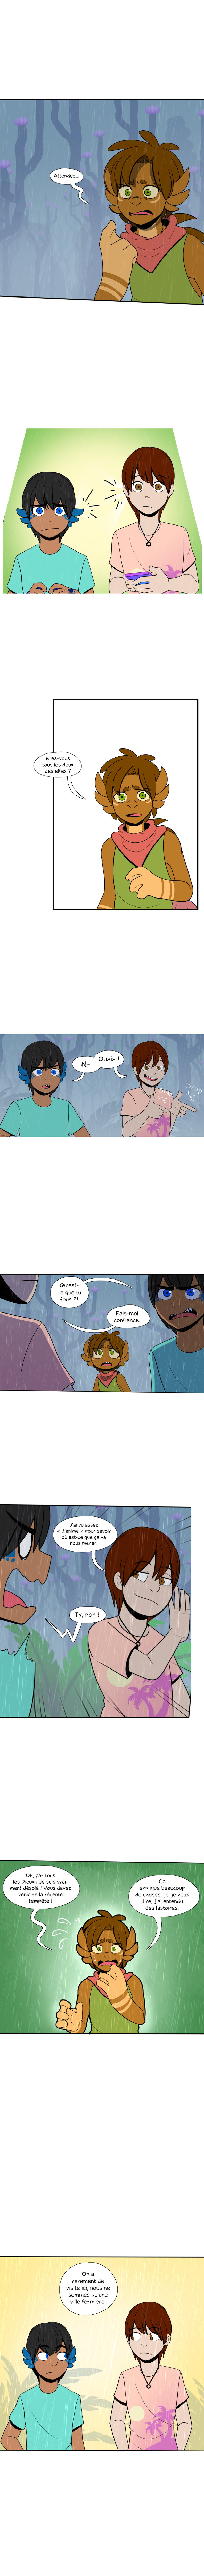 Spellward Bound: Chapter 2.4 - Page 1